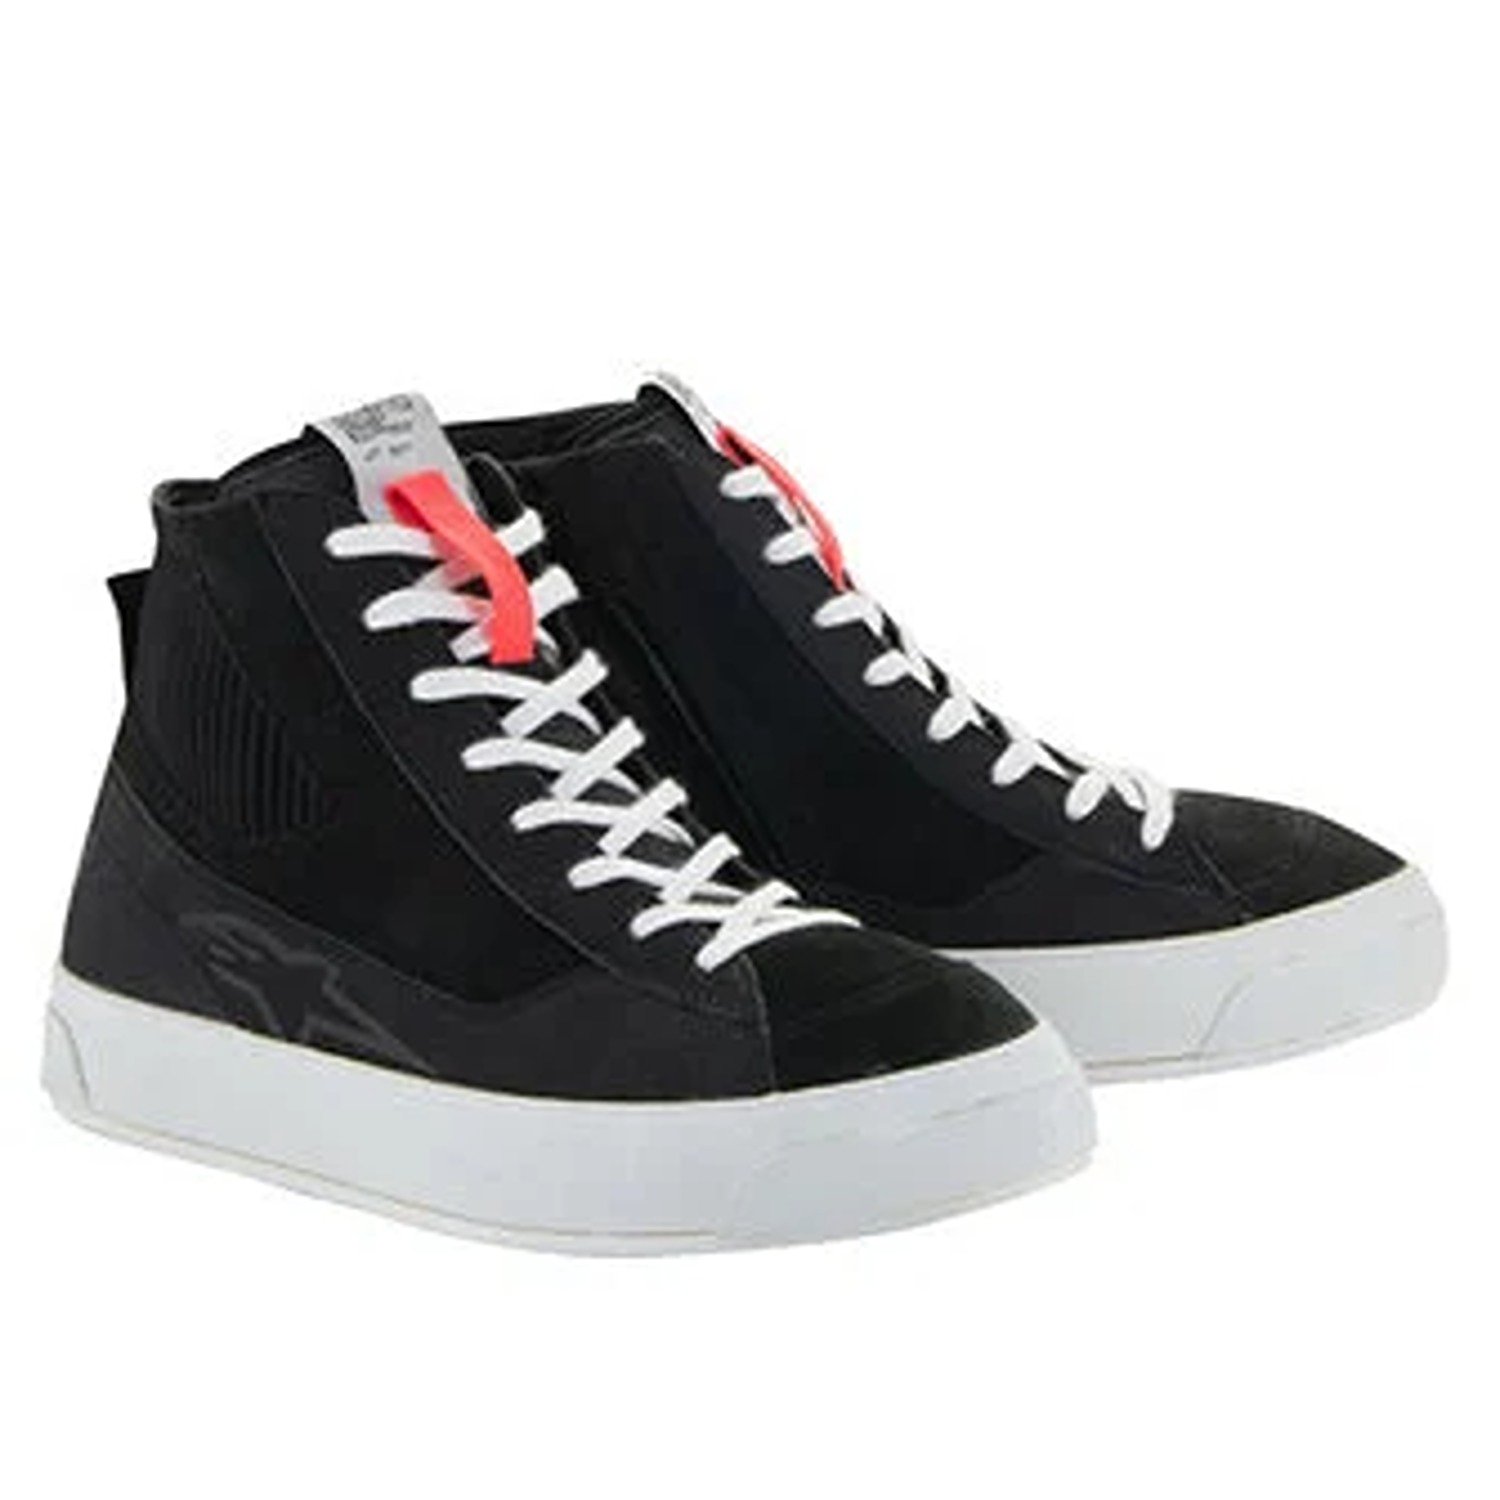 Image of EU Alpinestars Stated Shoes Black Taille US 105